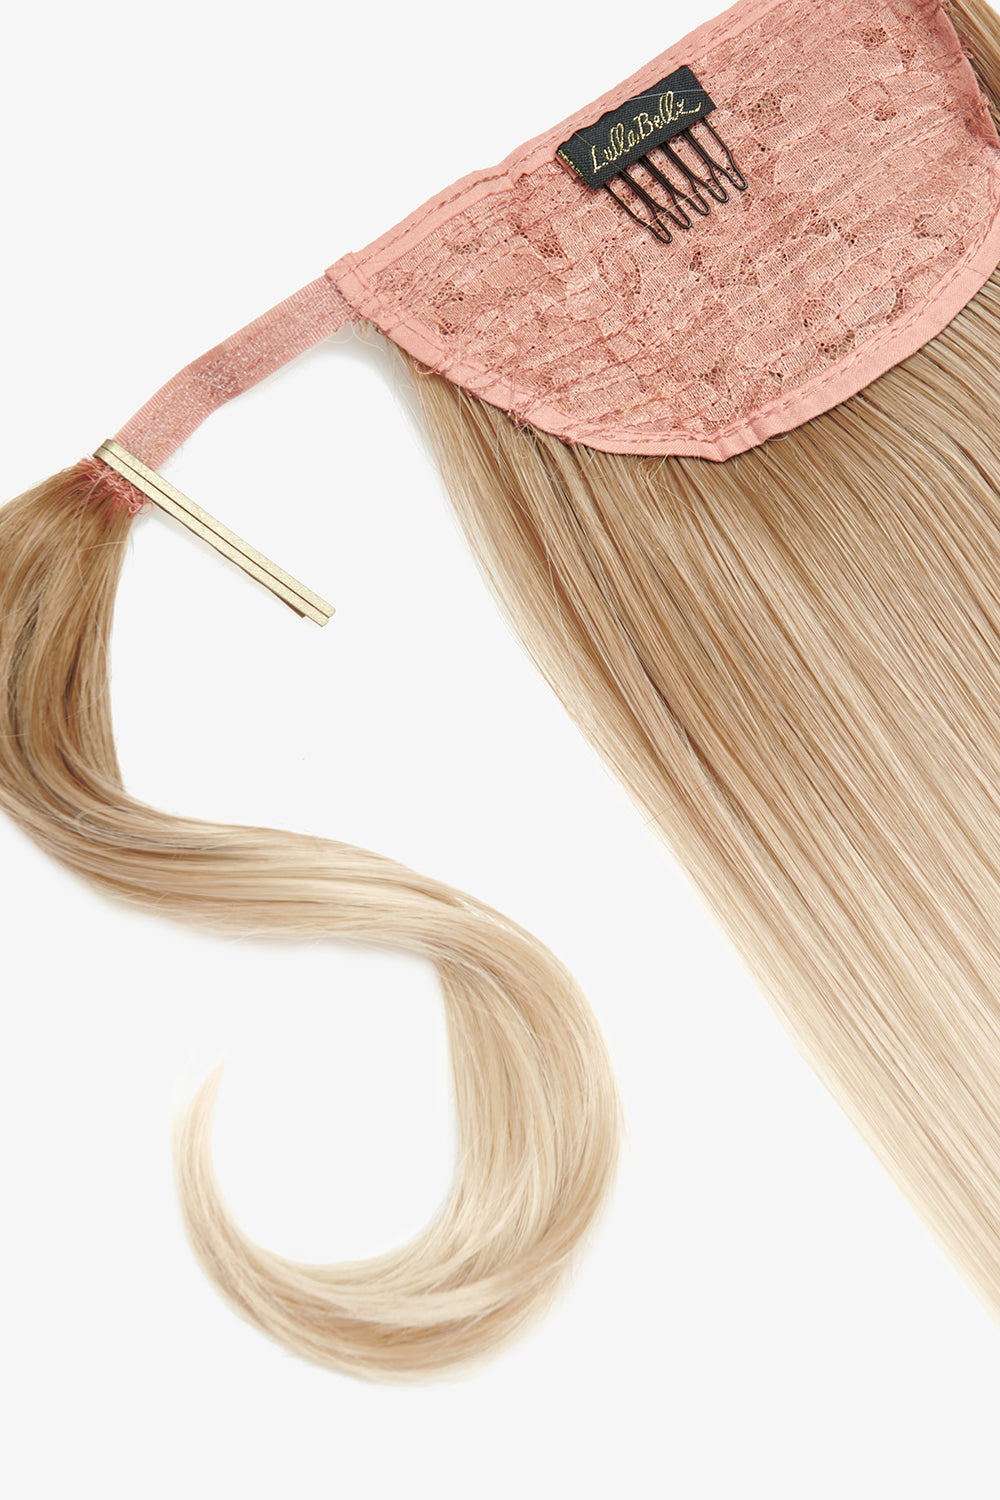 Grande Lengths 26" Straight Wraparound Ponytail - Rooted Light Blonde